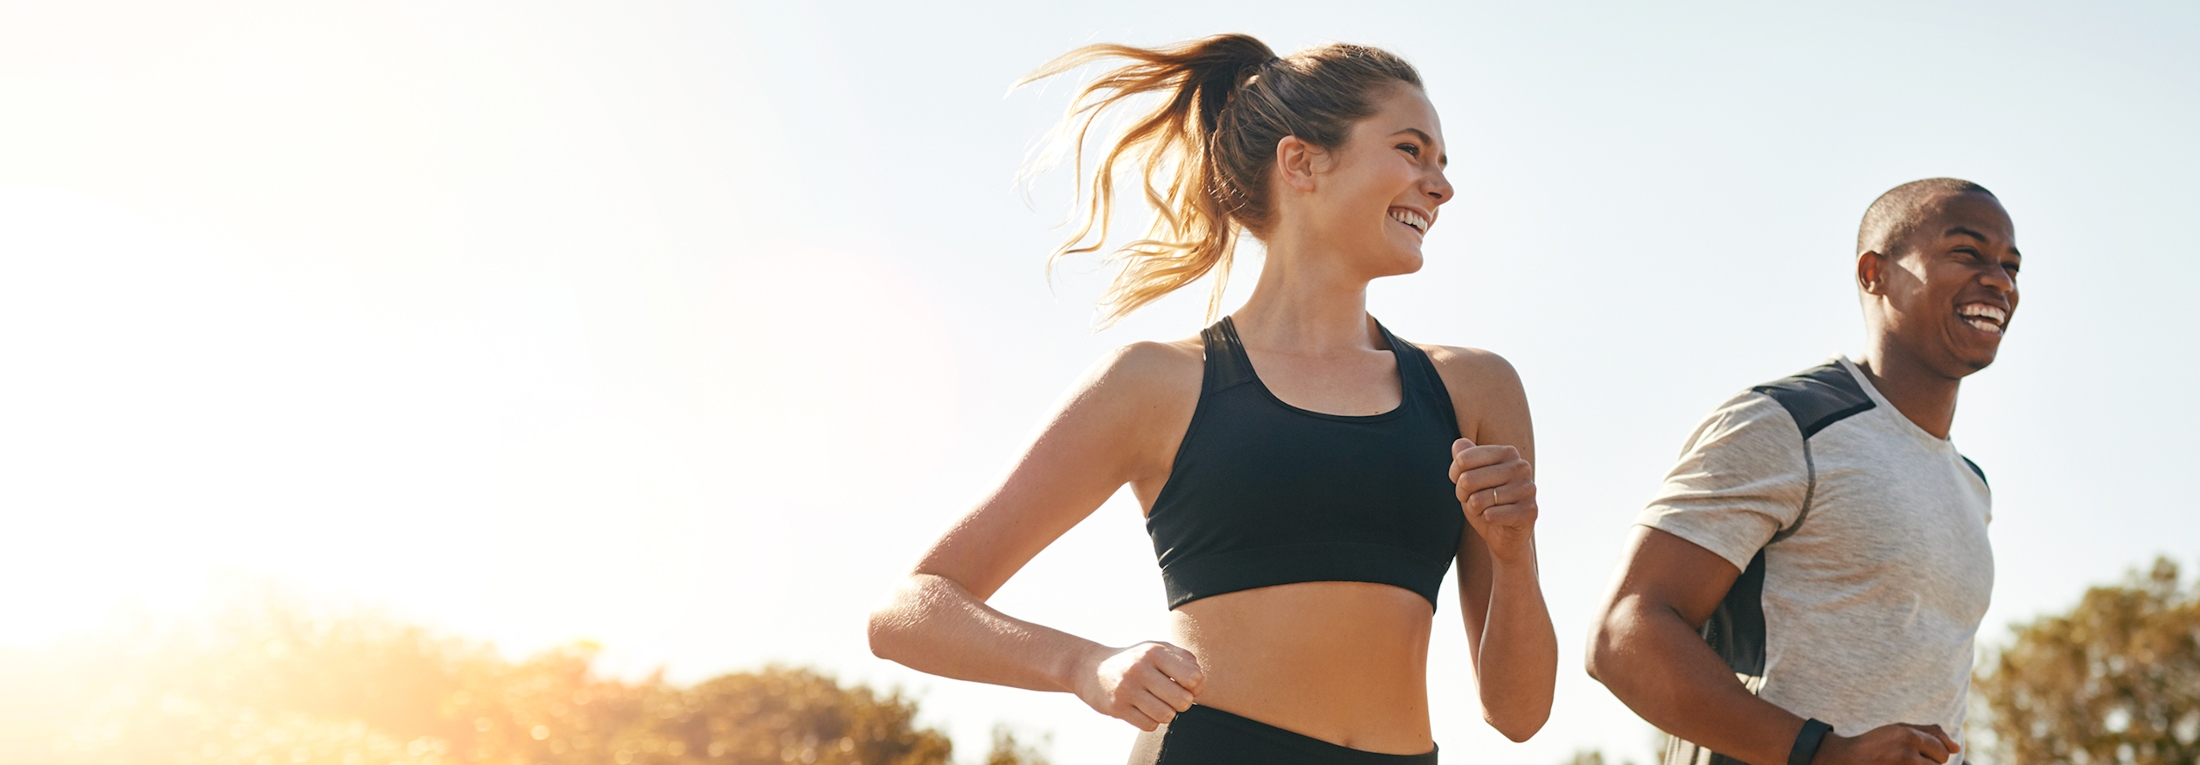 Man and woman smiling while running outside